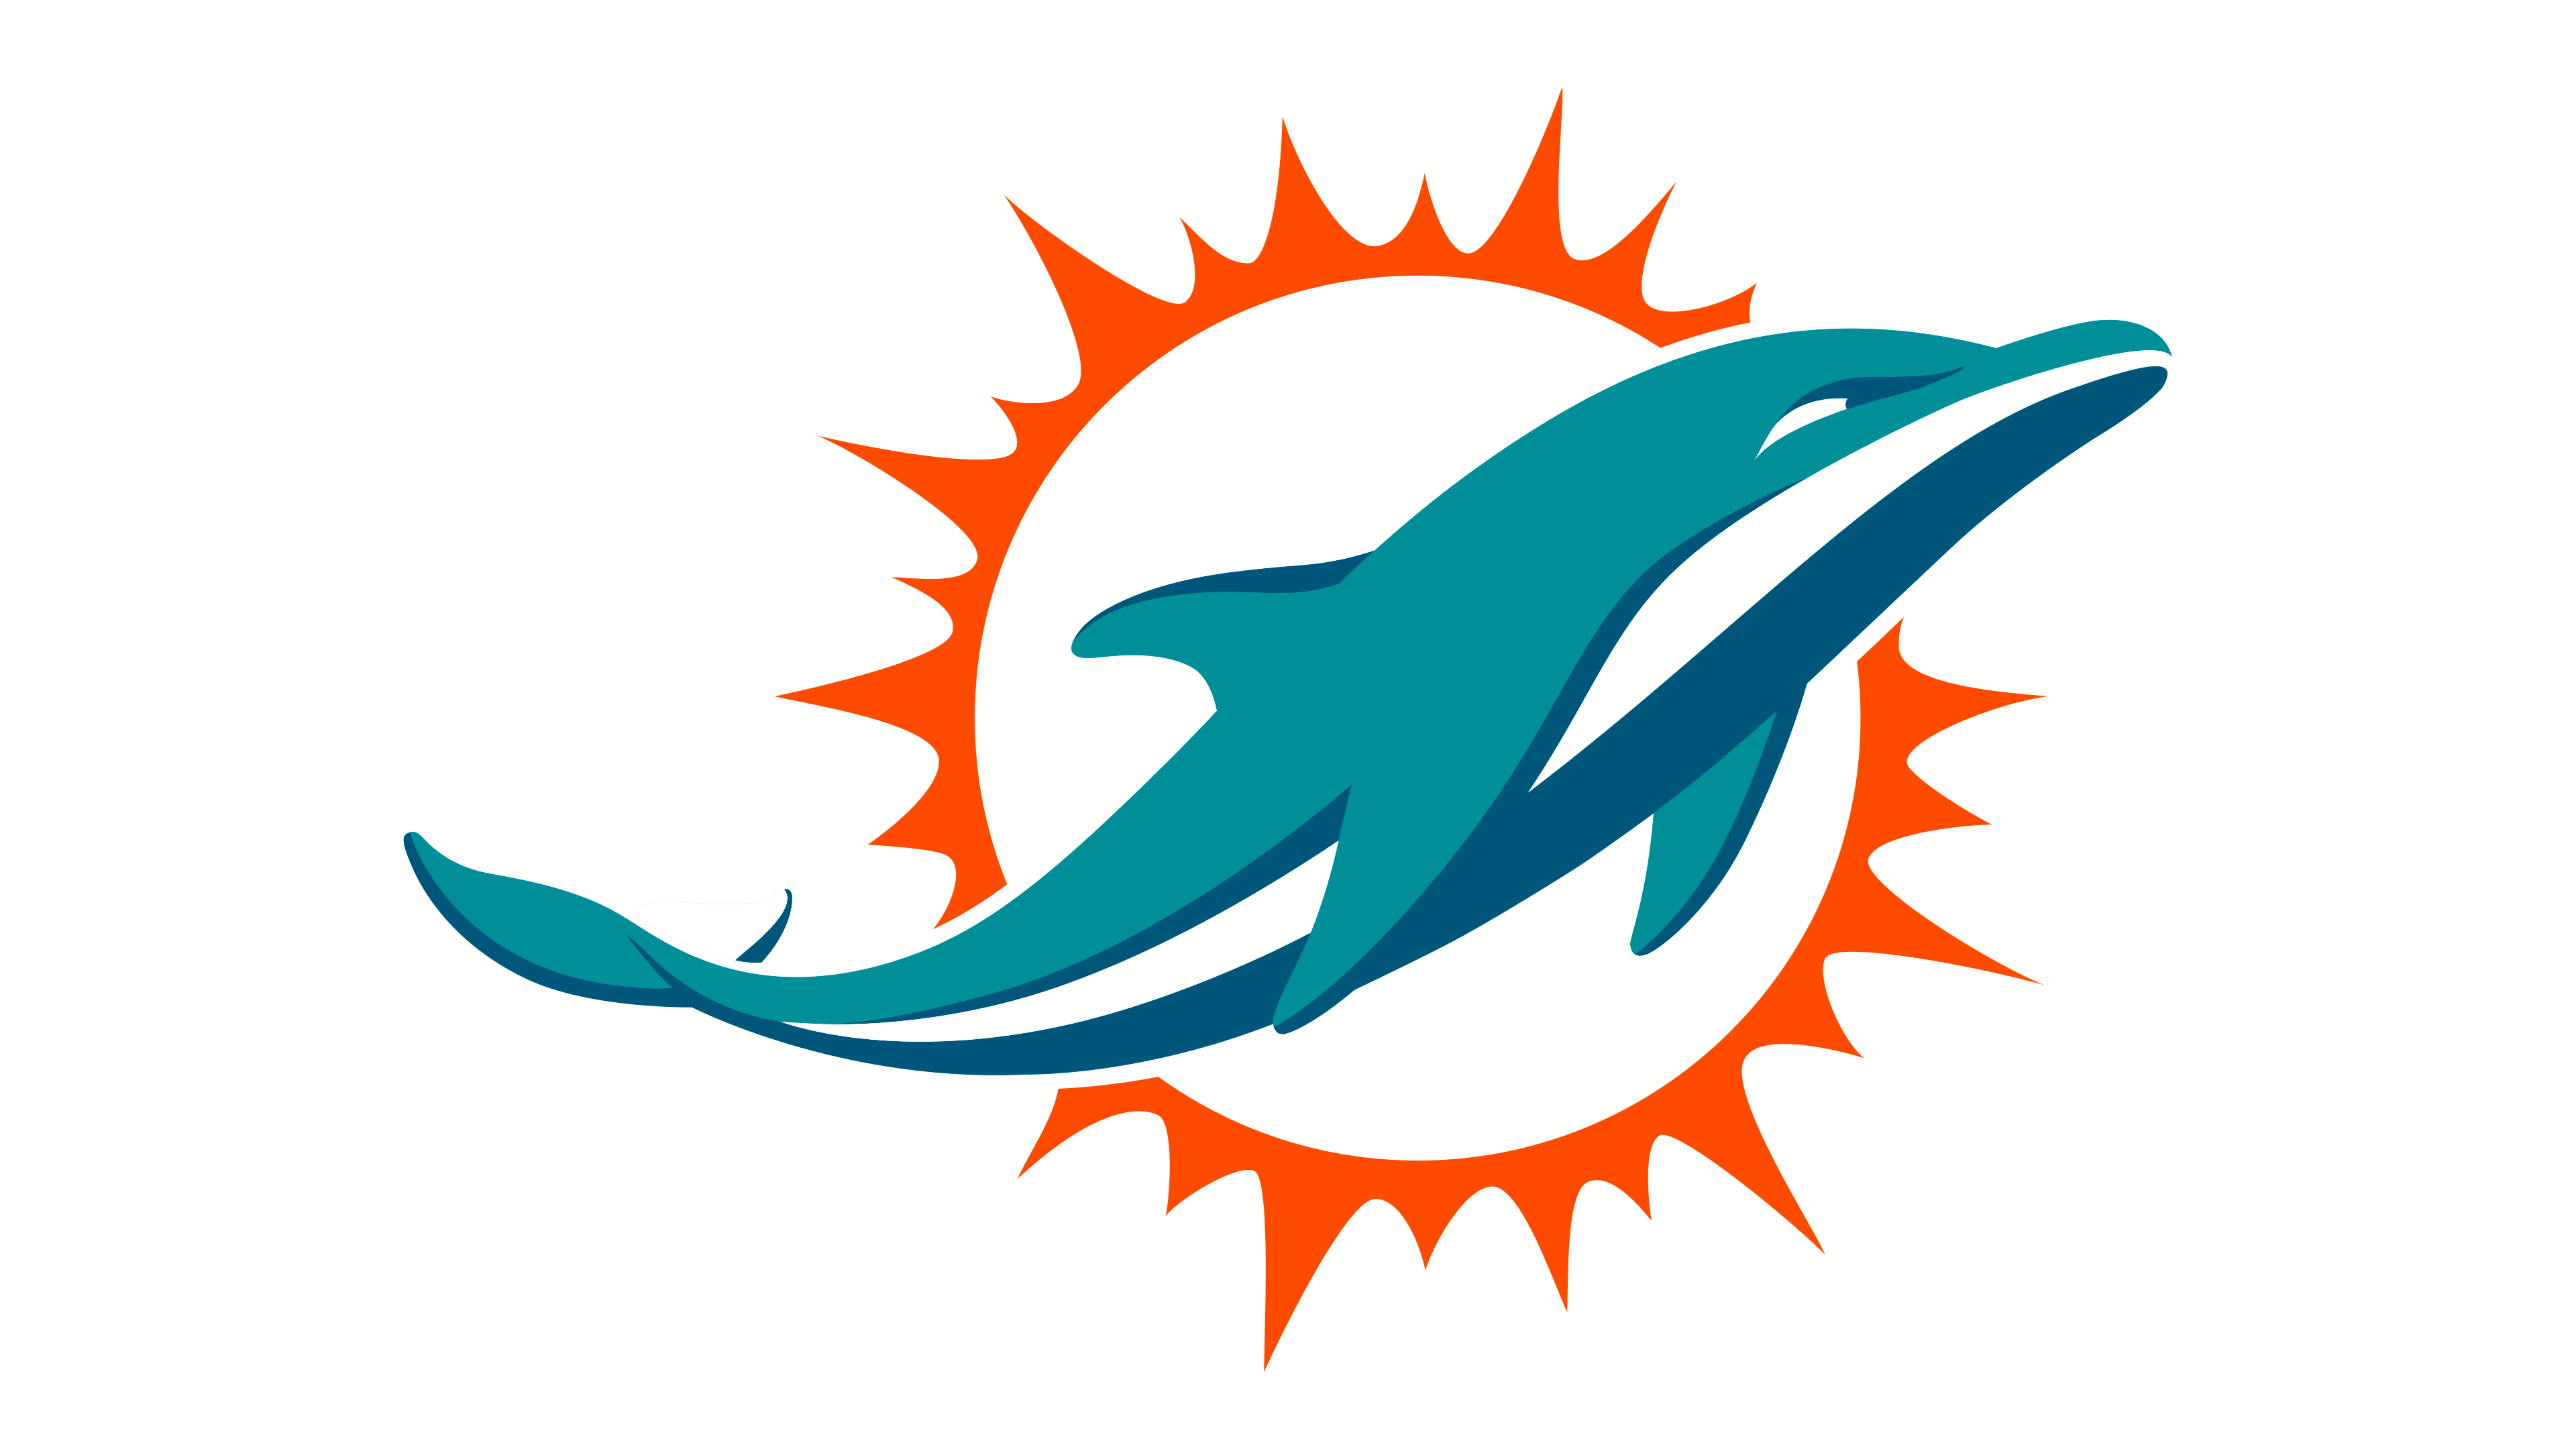 Miami Dolphins Logo Png, Miami Dolphins Logos Download Look at